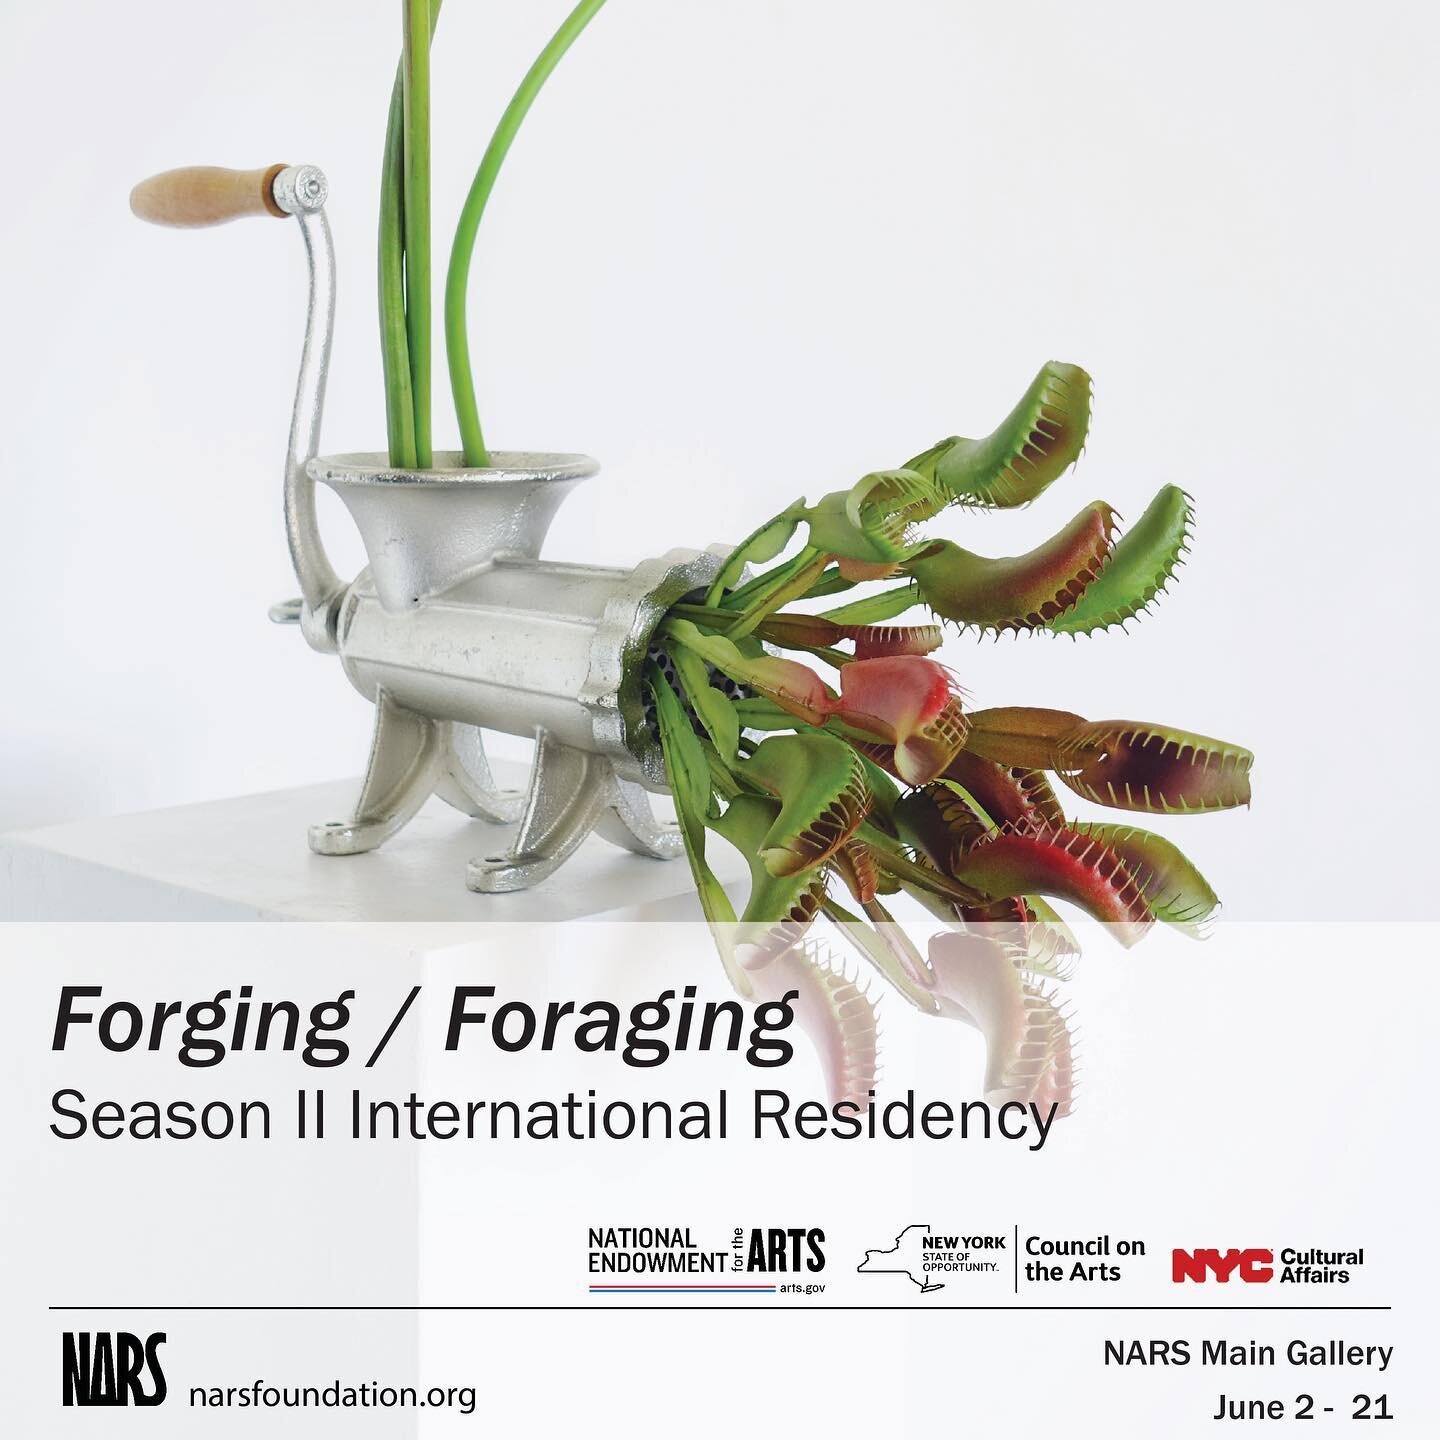 NARS Foundation is pleased to present 'Forging / Foraging', a group exhibition featuring the work of Season II 2023 International Residency artists. Through varying strategies, the artists in this exhibition examine their relationship to location and